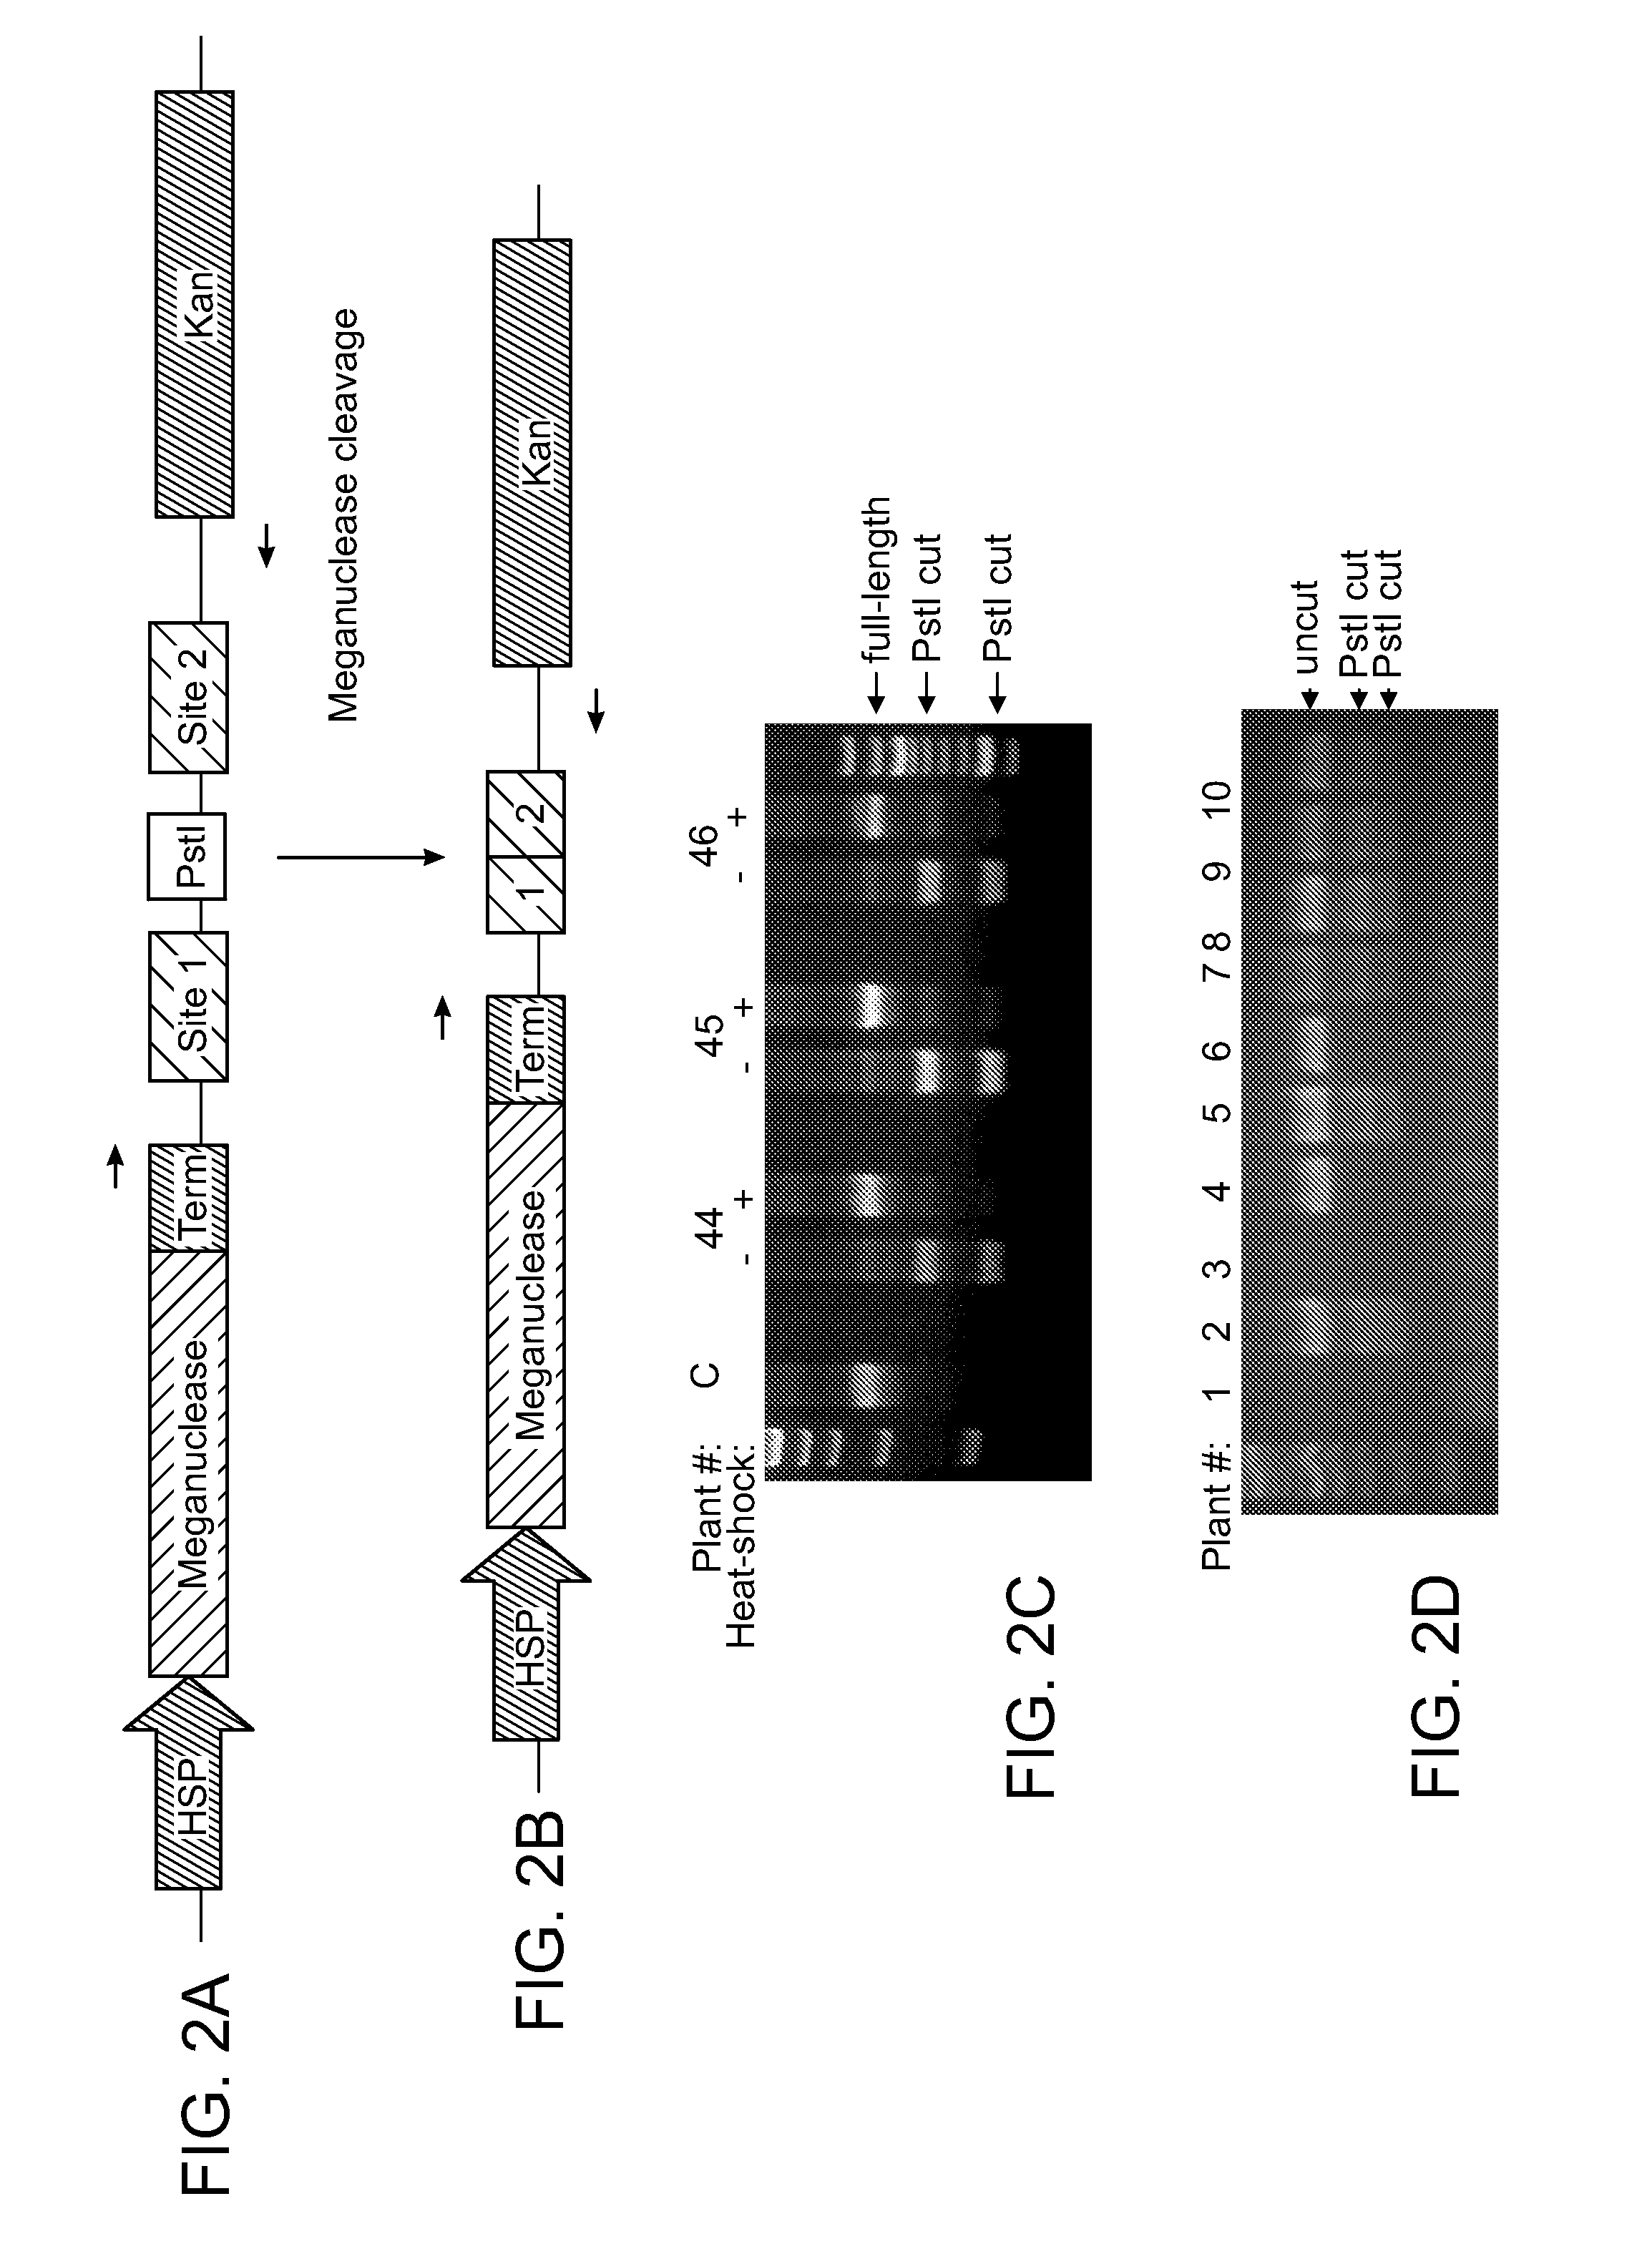 Temperature-dependent meganuclease activity